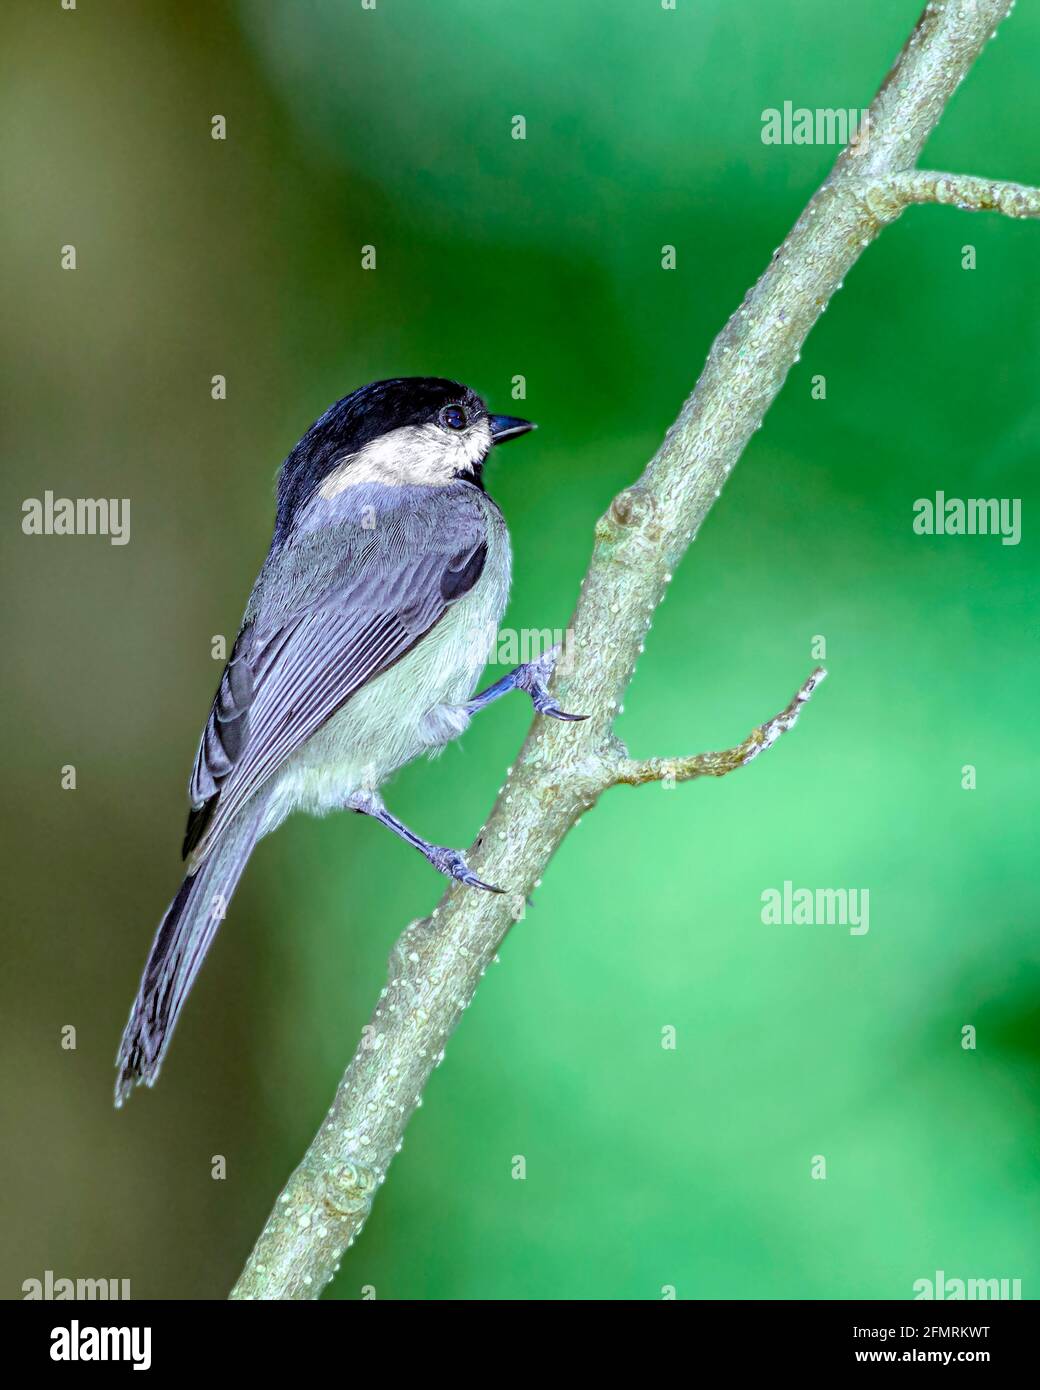 Black-capped Chickadee perched in tree Stock Photo